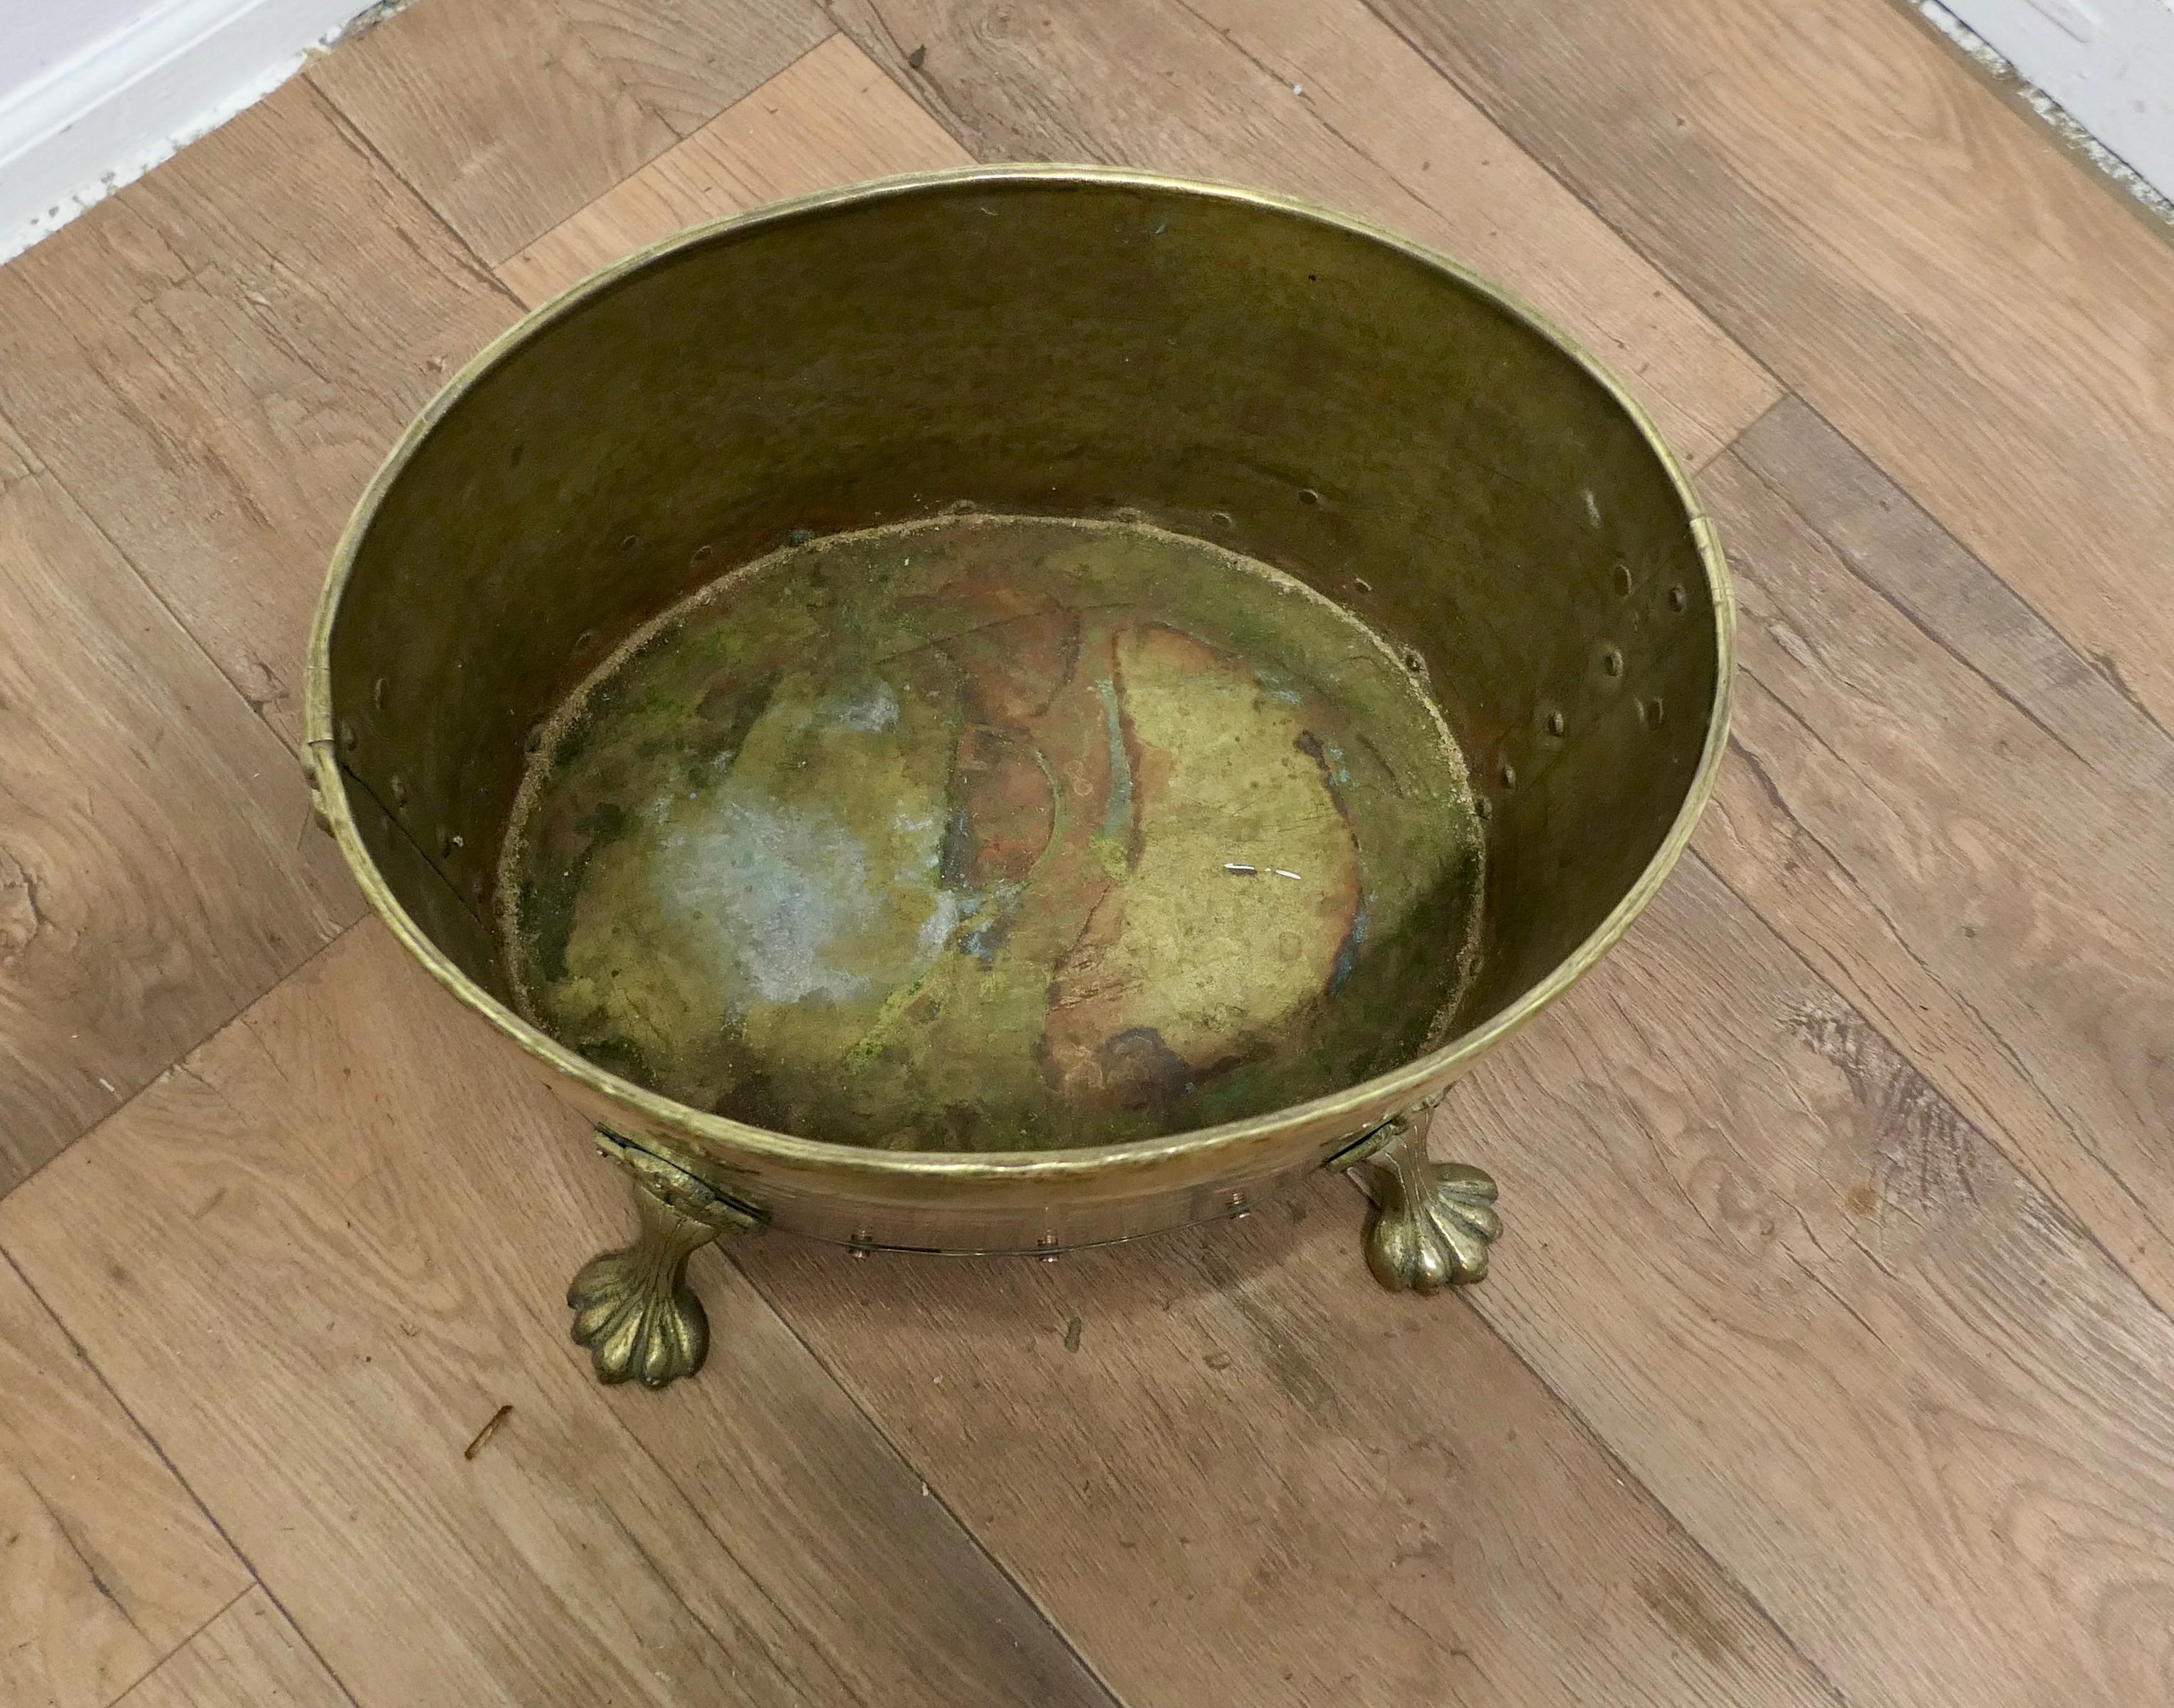 19th Century Oval Brass Lions Mask Log Bin  

This is a superior quality Brass log or coal bin, it has a heavily riveted construction at the seams, 2 Lions Mask handles and it is set on 4 chunky lions paw feet.
The Brass Cauldron would work well as